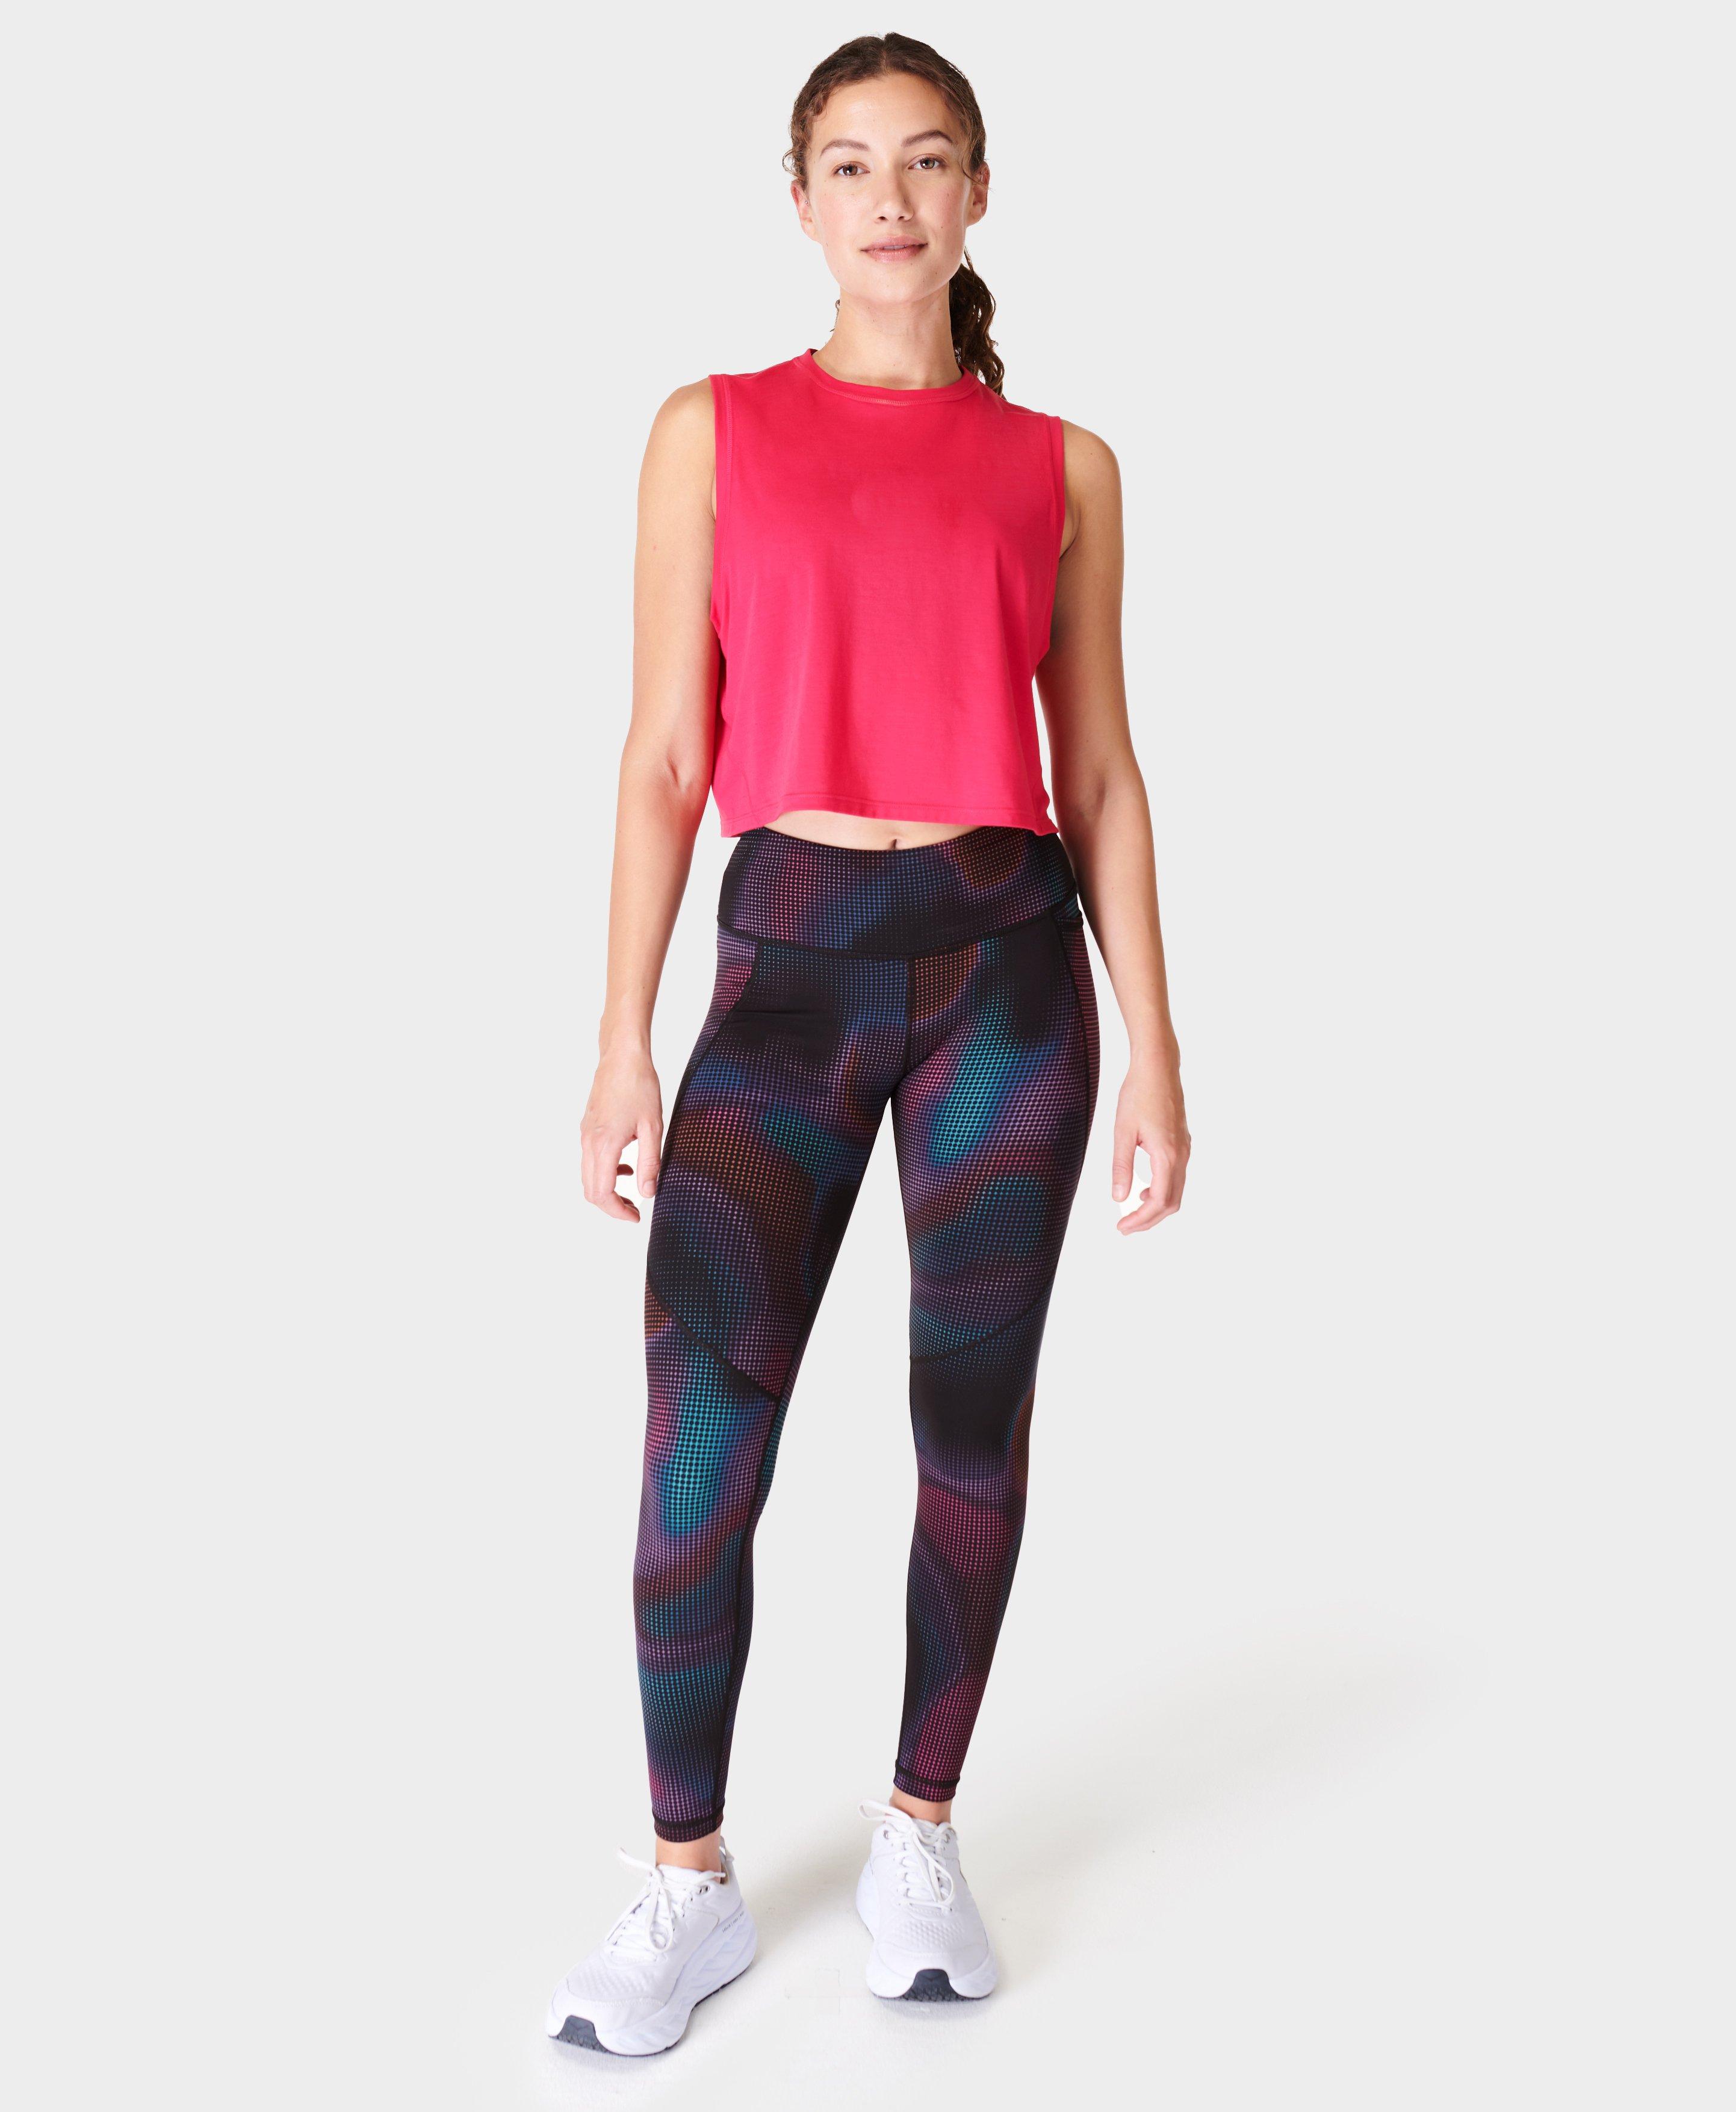 Black and Red Ombre Yoga Leggings, Gradient Women Girls Workout